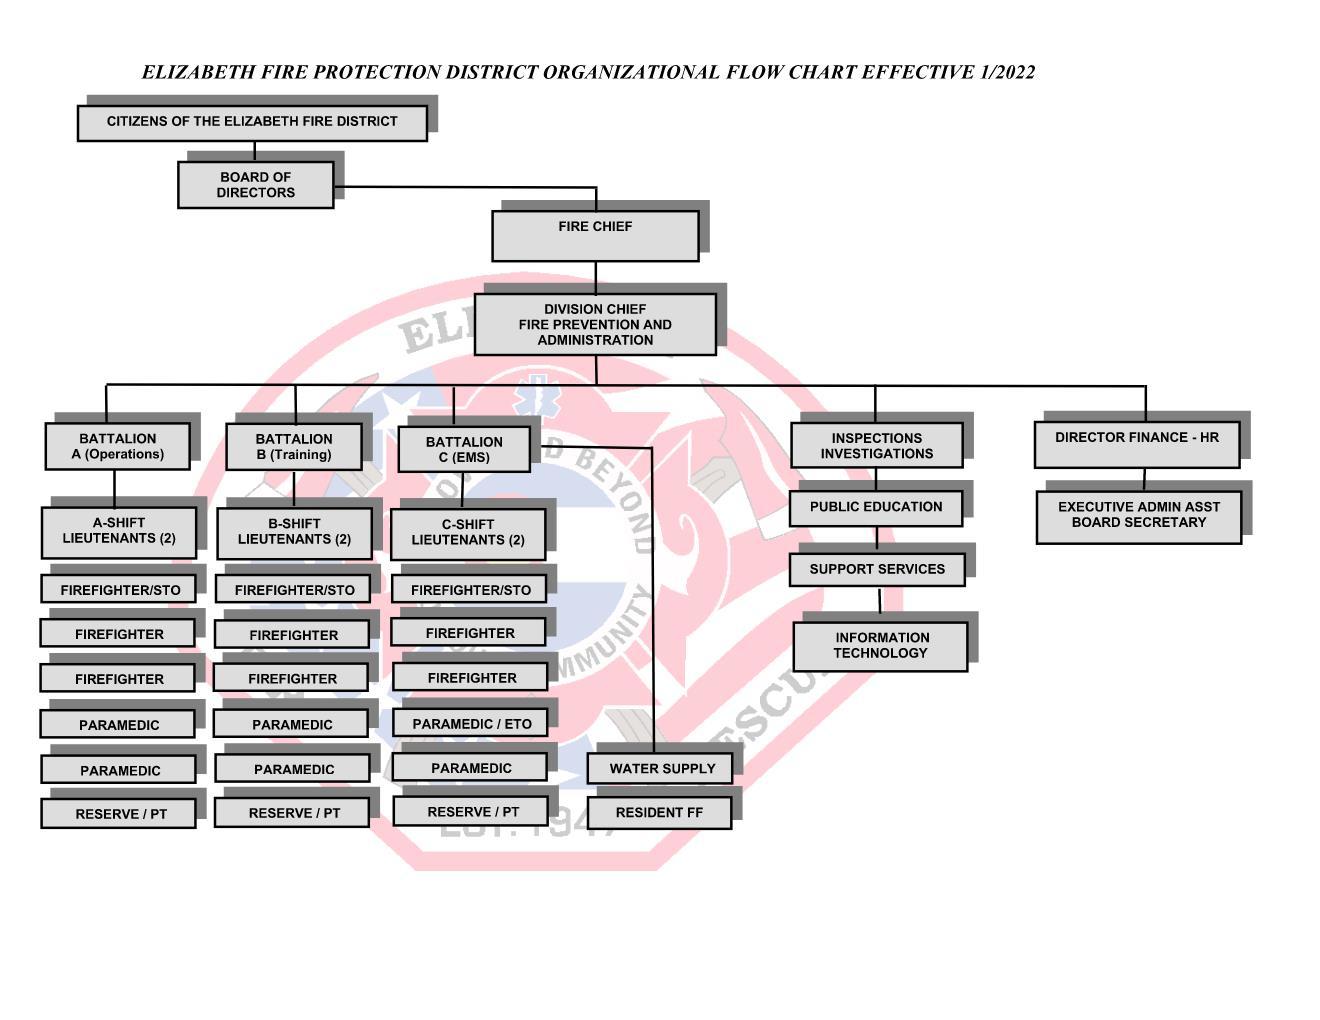 Organizational chart for the Elizabeth Fire Protection District